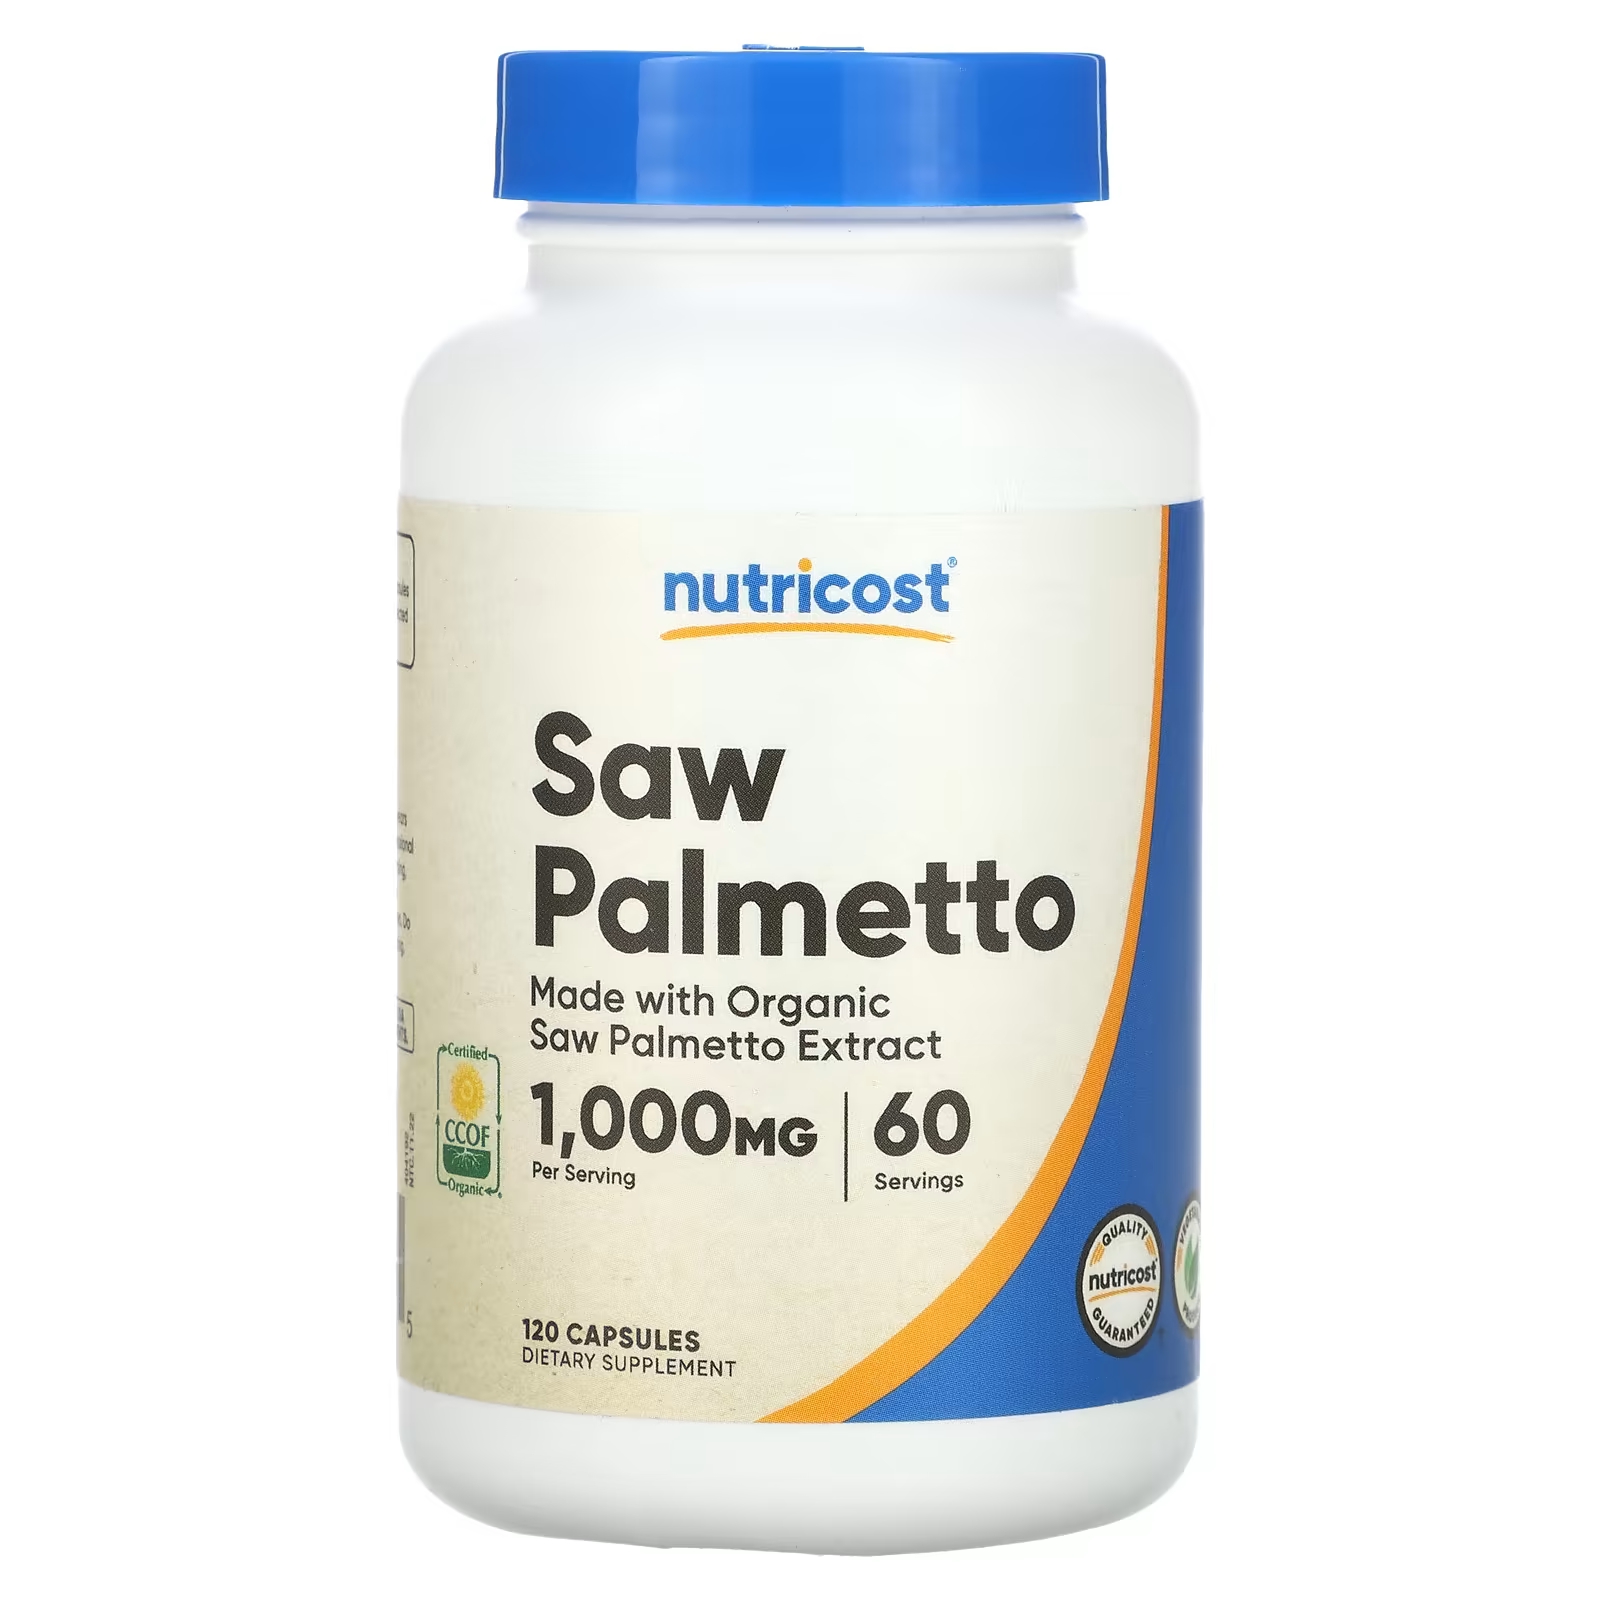 Nutricost Saw Palmetto 1000 мг 120 капсул (500 мг на капсулу) nutricost кверцетин 1000 мг 120 капсул 500 мг на капсулу